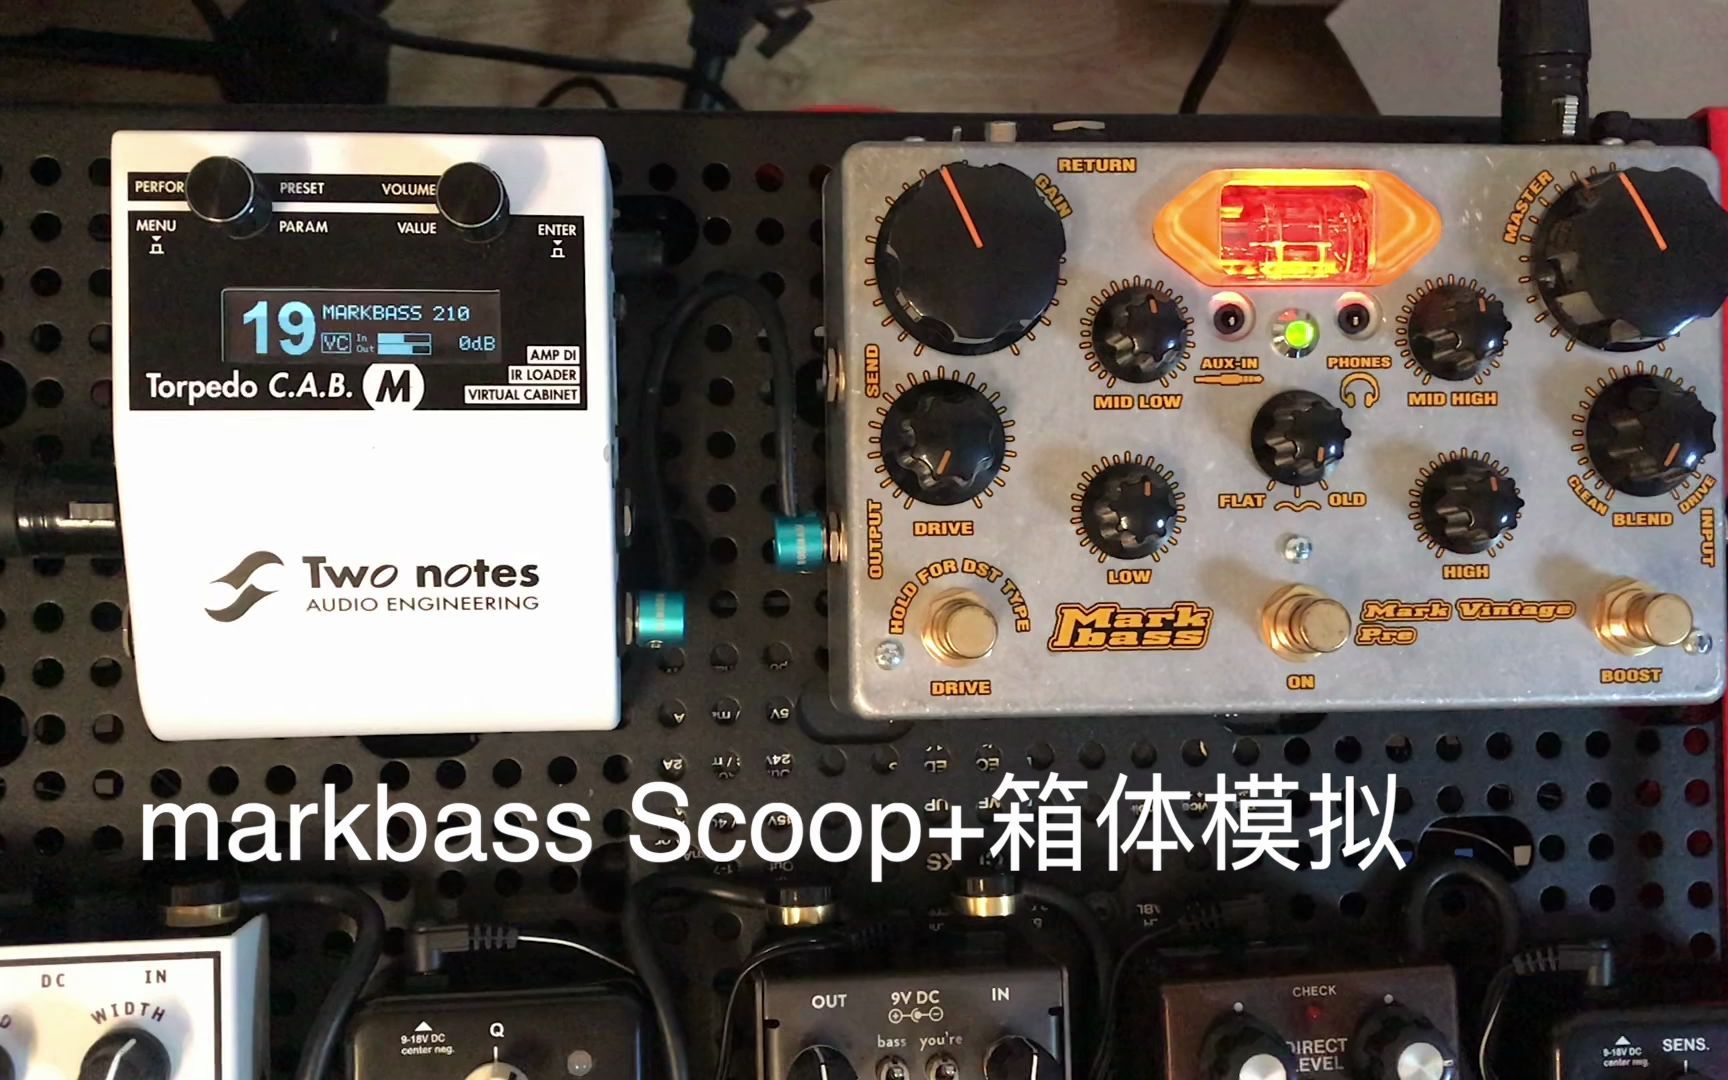 markbass vintage pre + two notes箱体（markbass 210）-哔哩哔哩